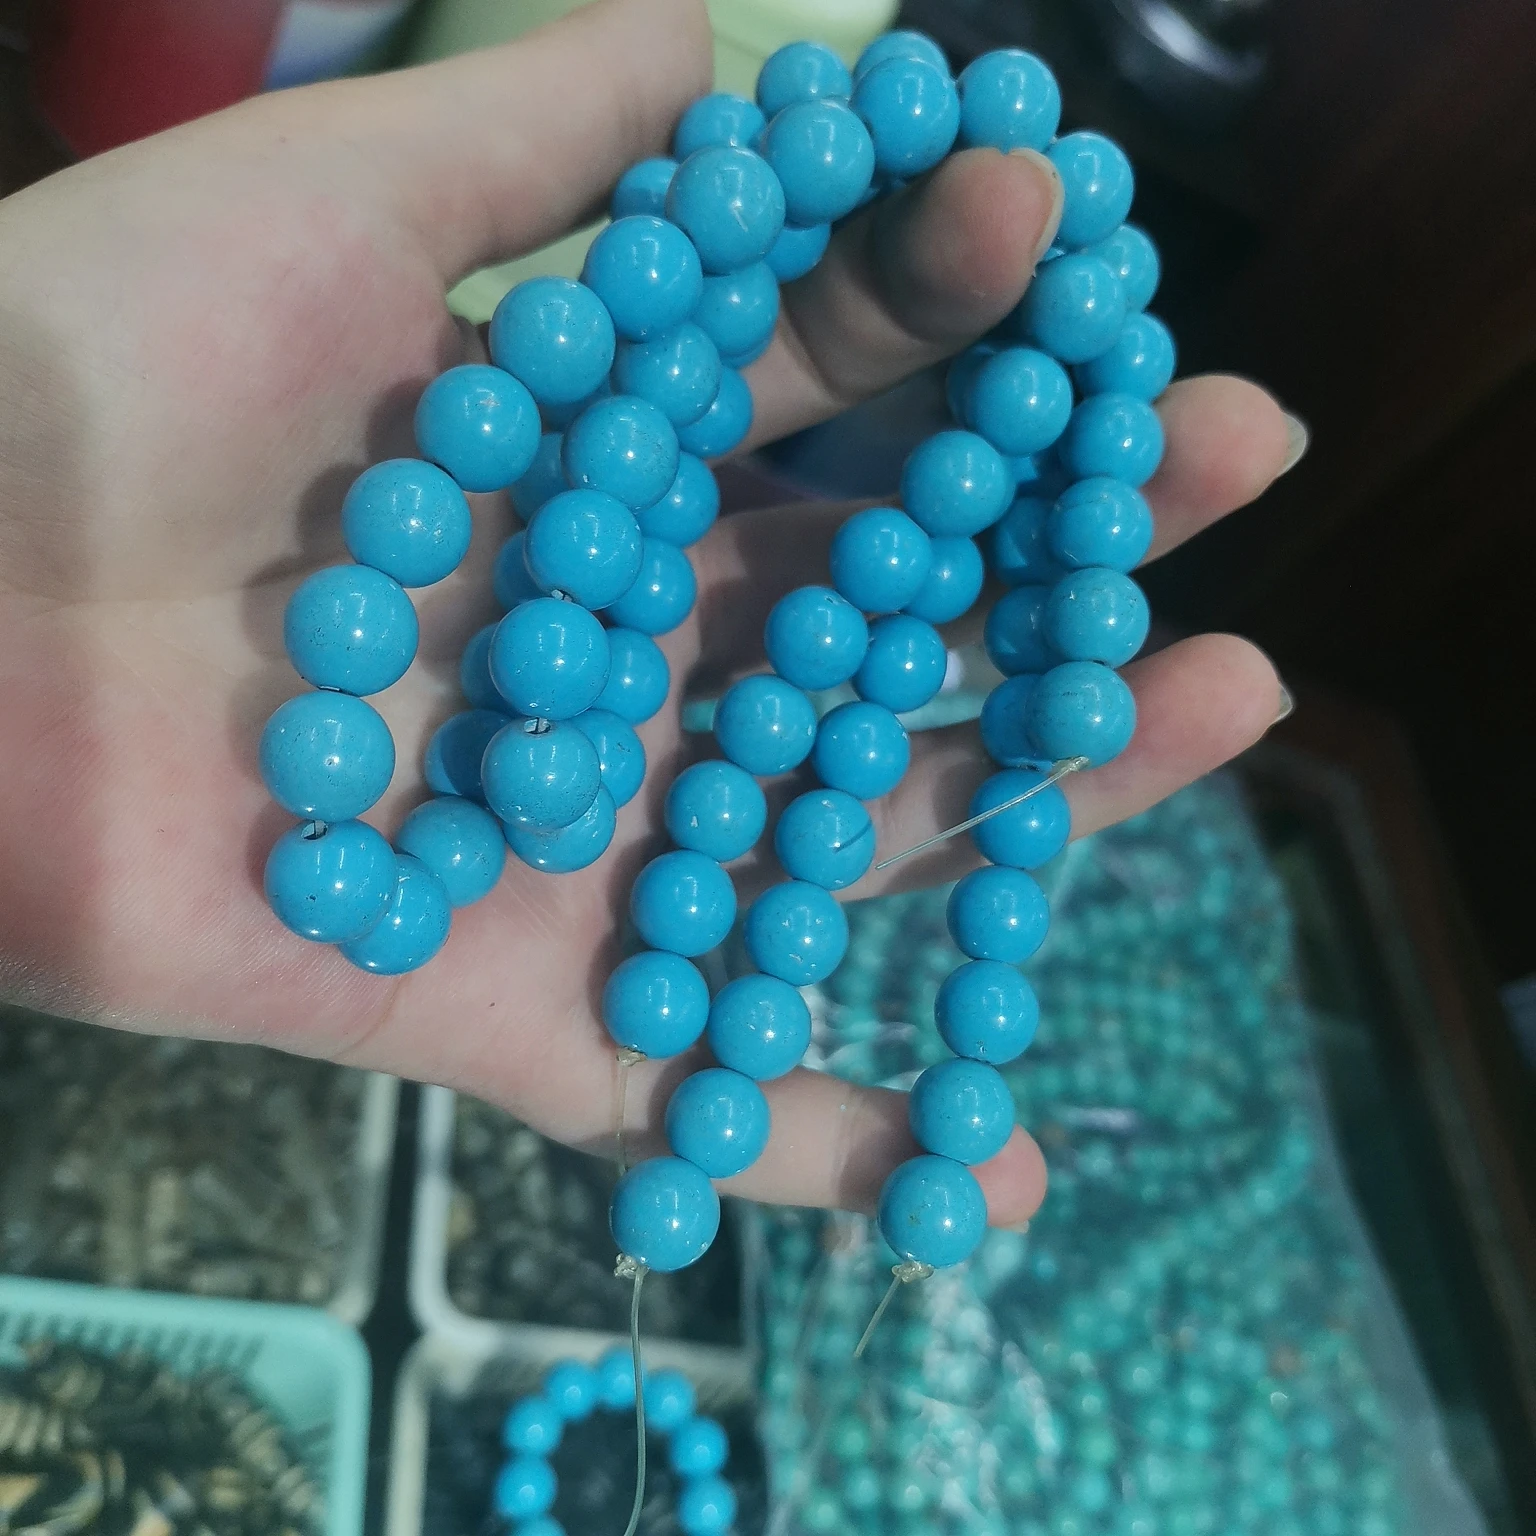 Any 1Pcs Natural Turquoise Round Bead Pattern Necklace Bracelet Accessories Loose DIY Material Wholesale Man Woman Jewelry